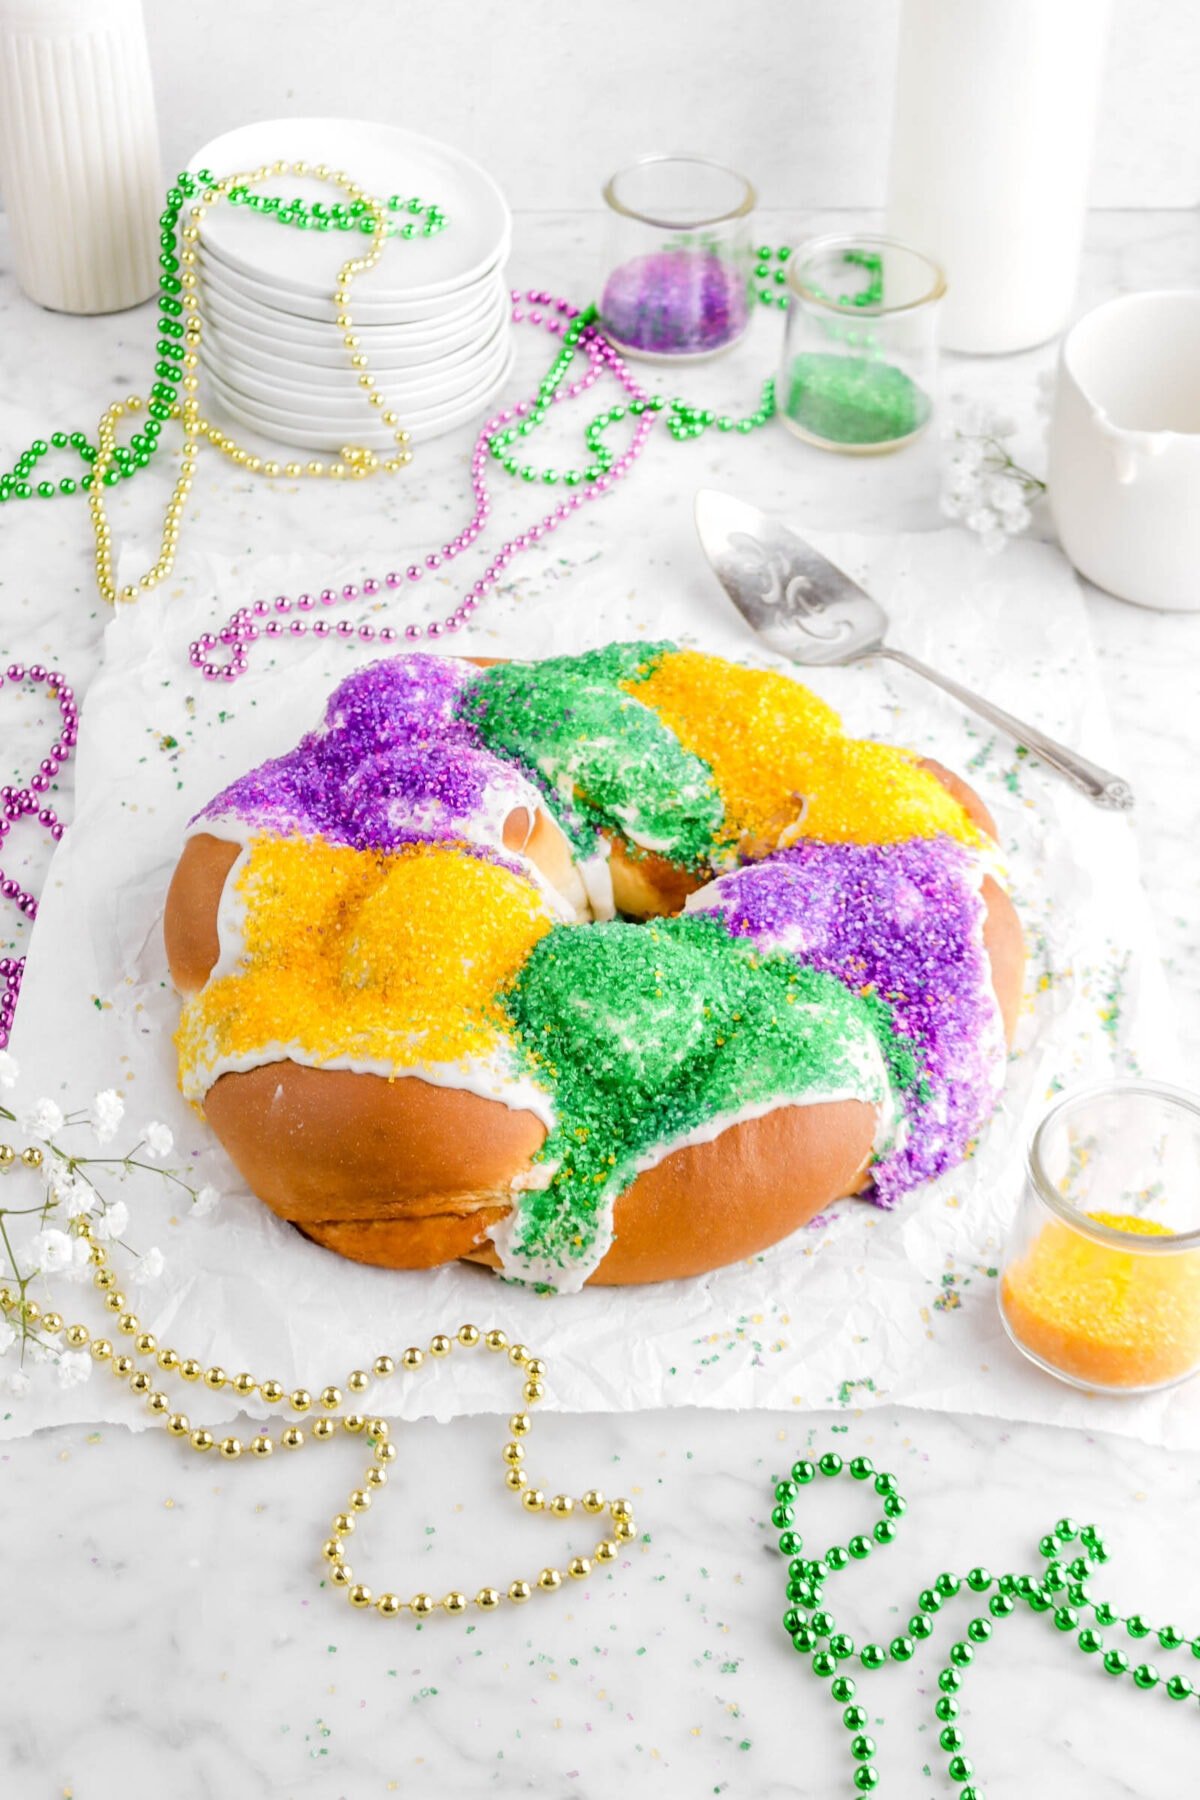 angled shot of king cake on parchment paper with flowers, beads, decorative sugar in jars, and glass of milk